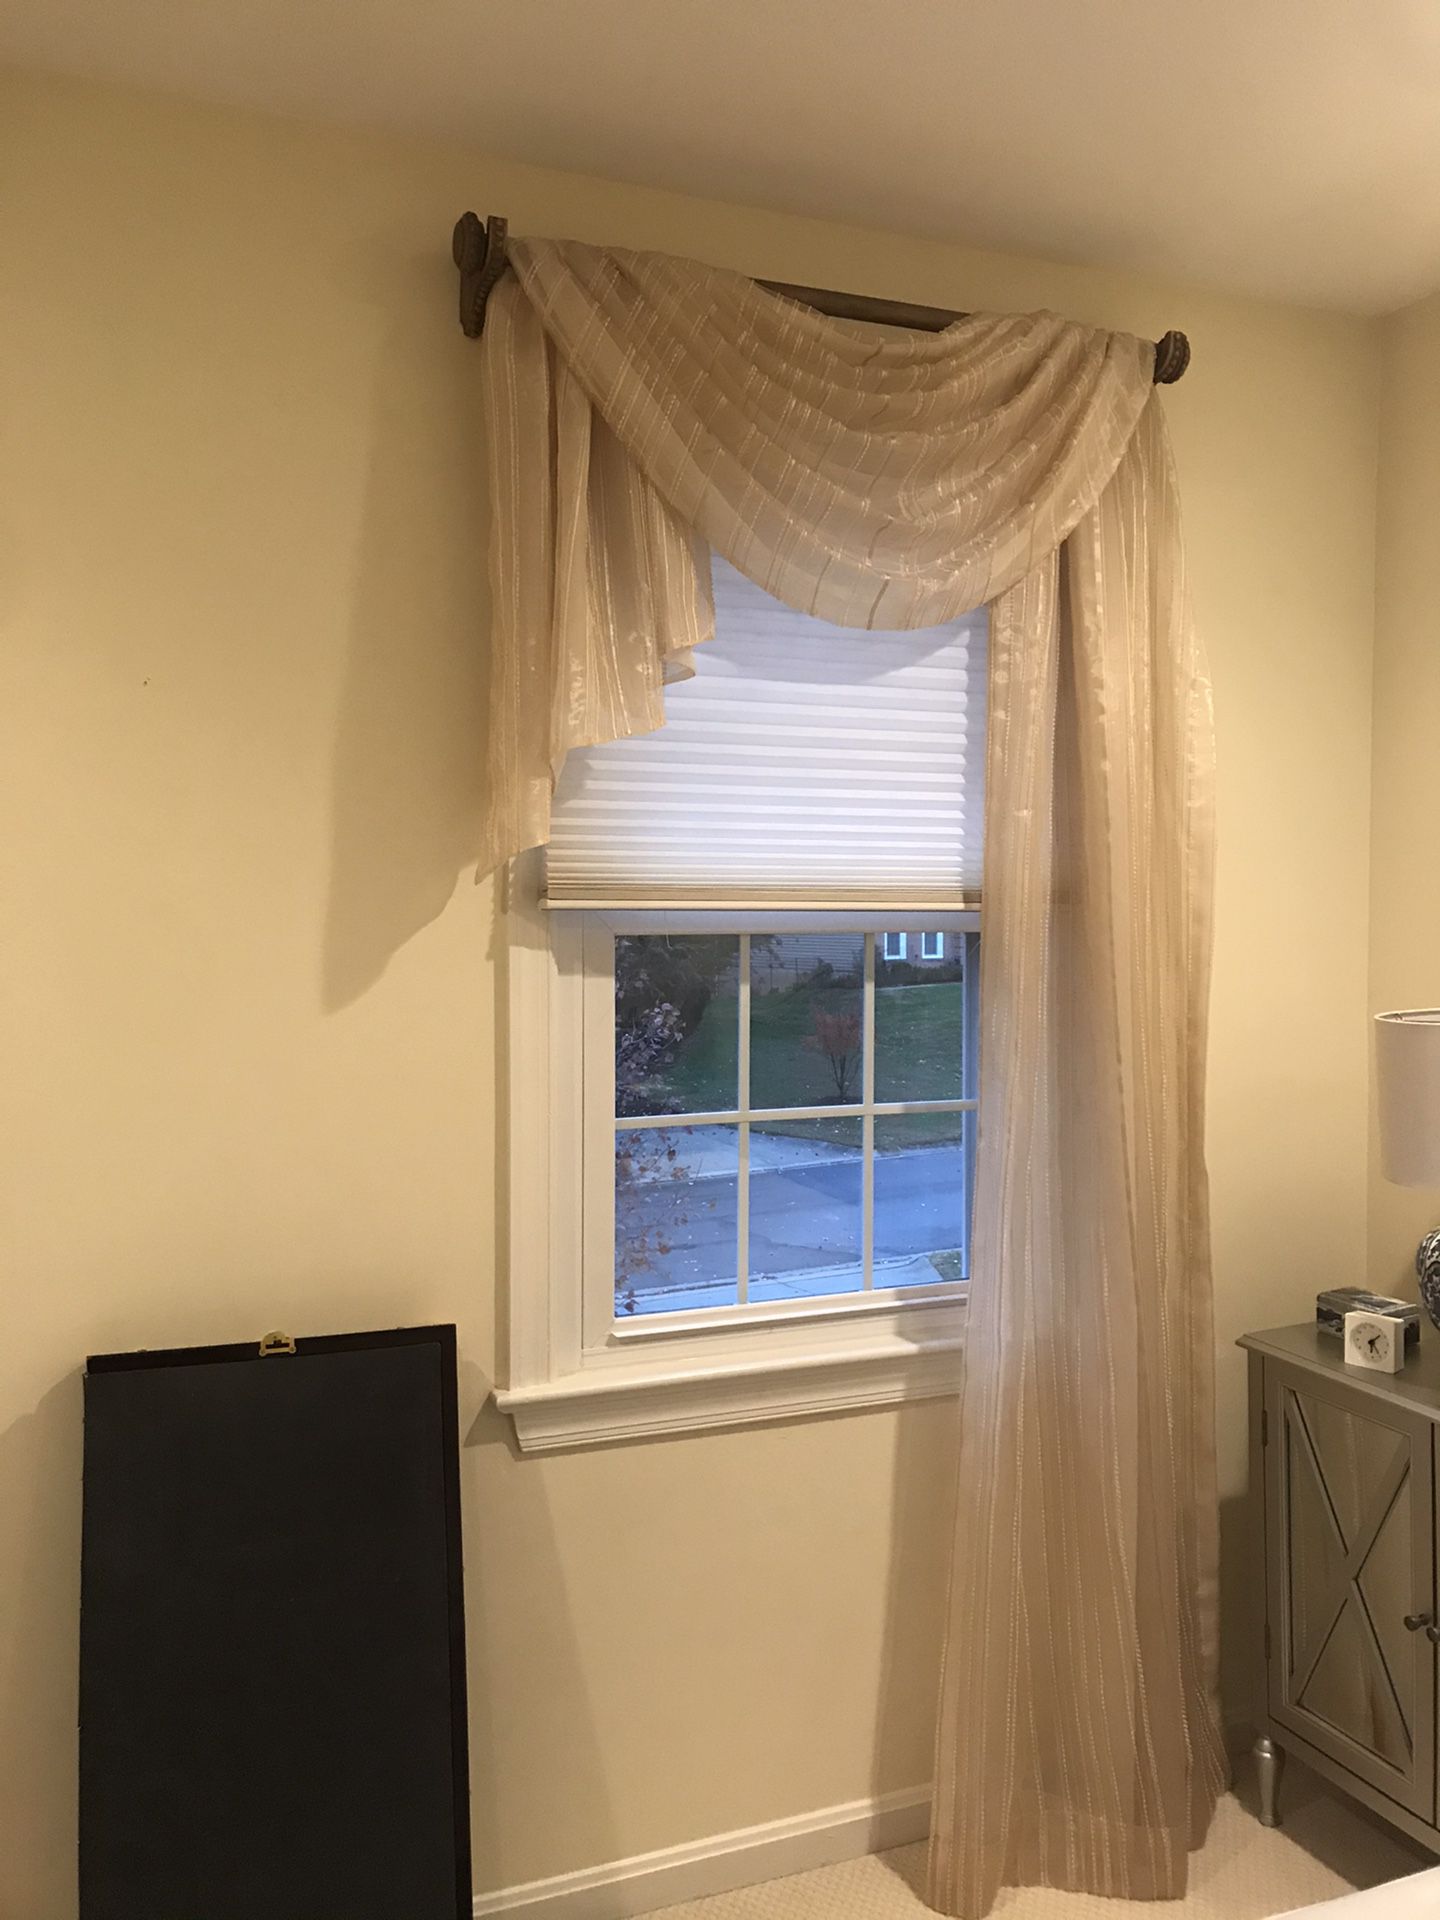 2 Curtains for sale and curtain rods